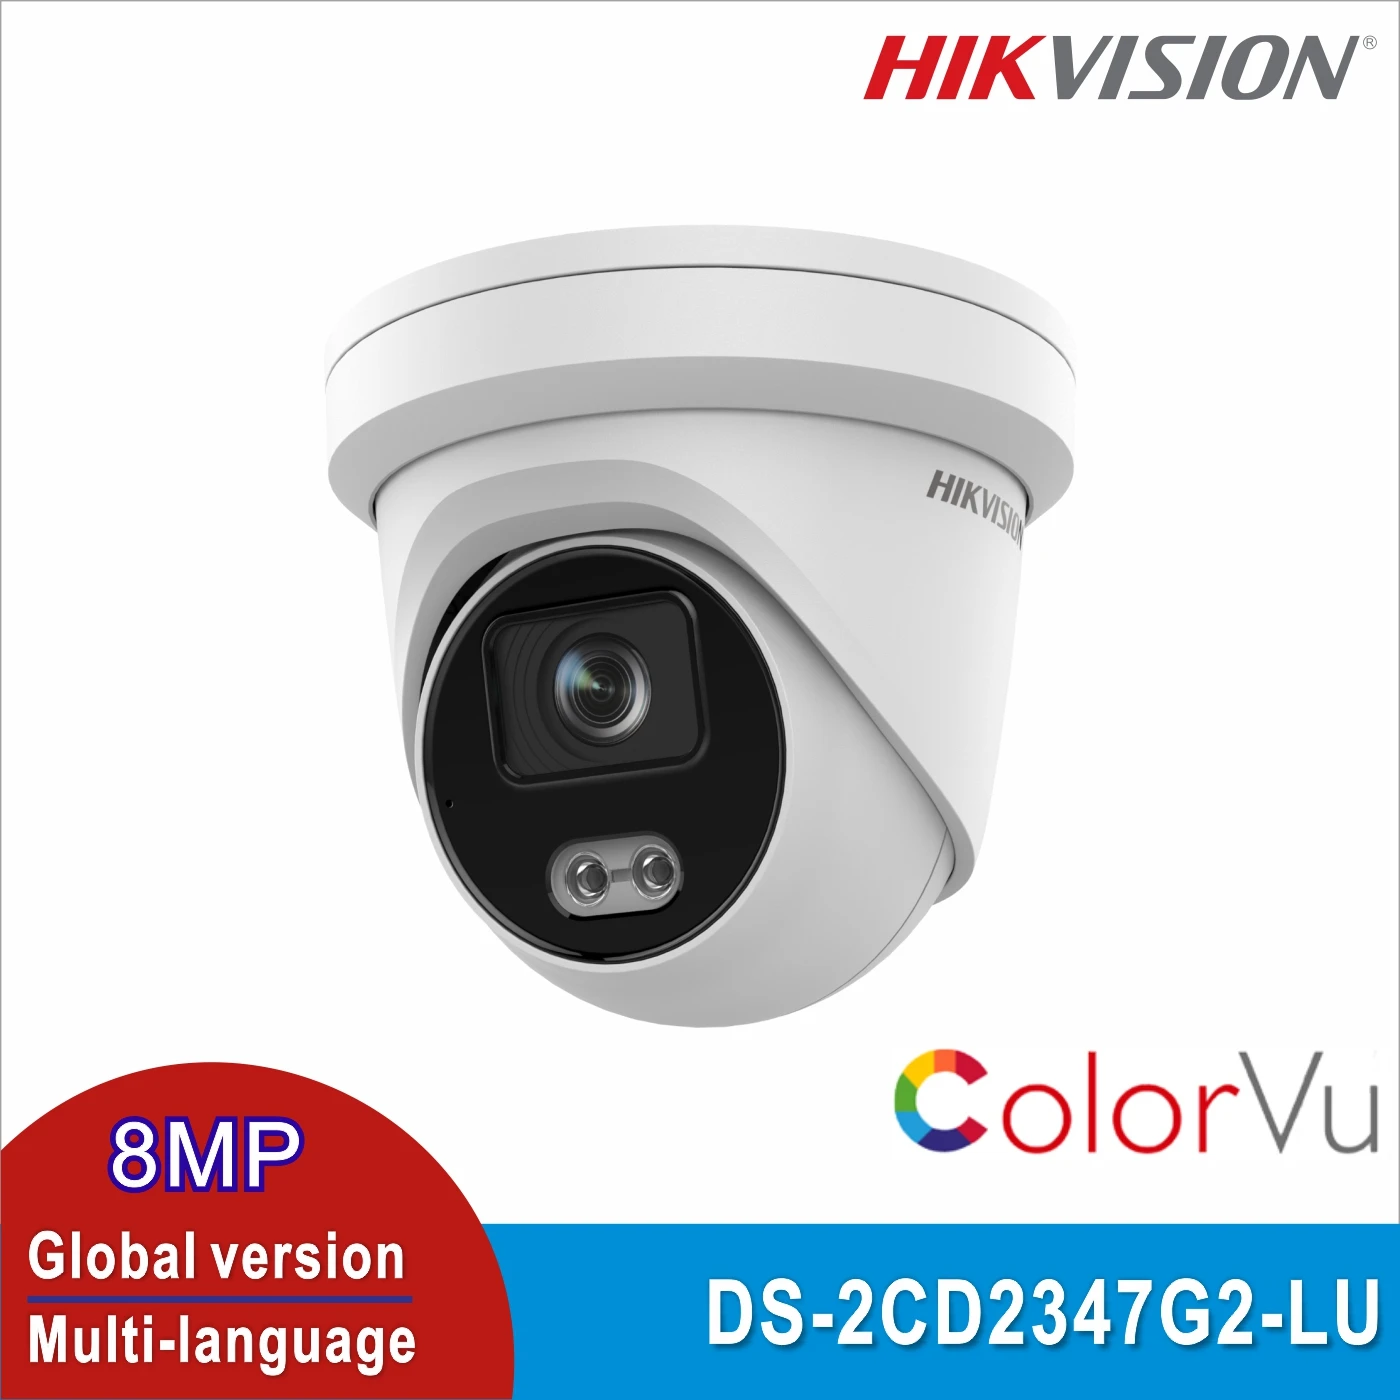 

Original Hikvision IP DS-2CD2347G2-LU ColorVu 4MP Mic Built in Turret Network Dome IPC POE Camera